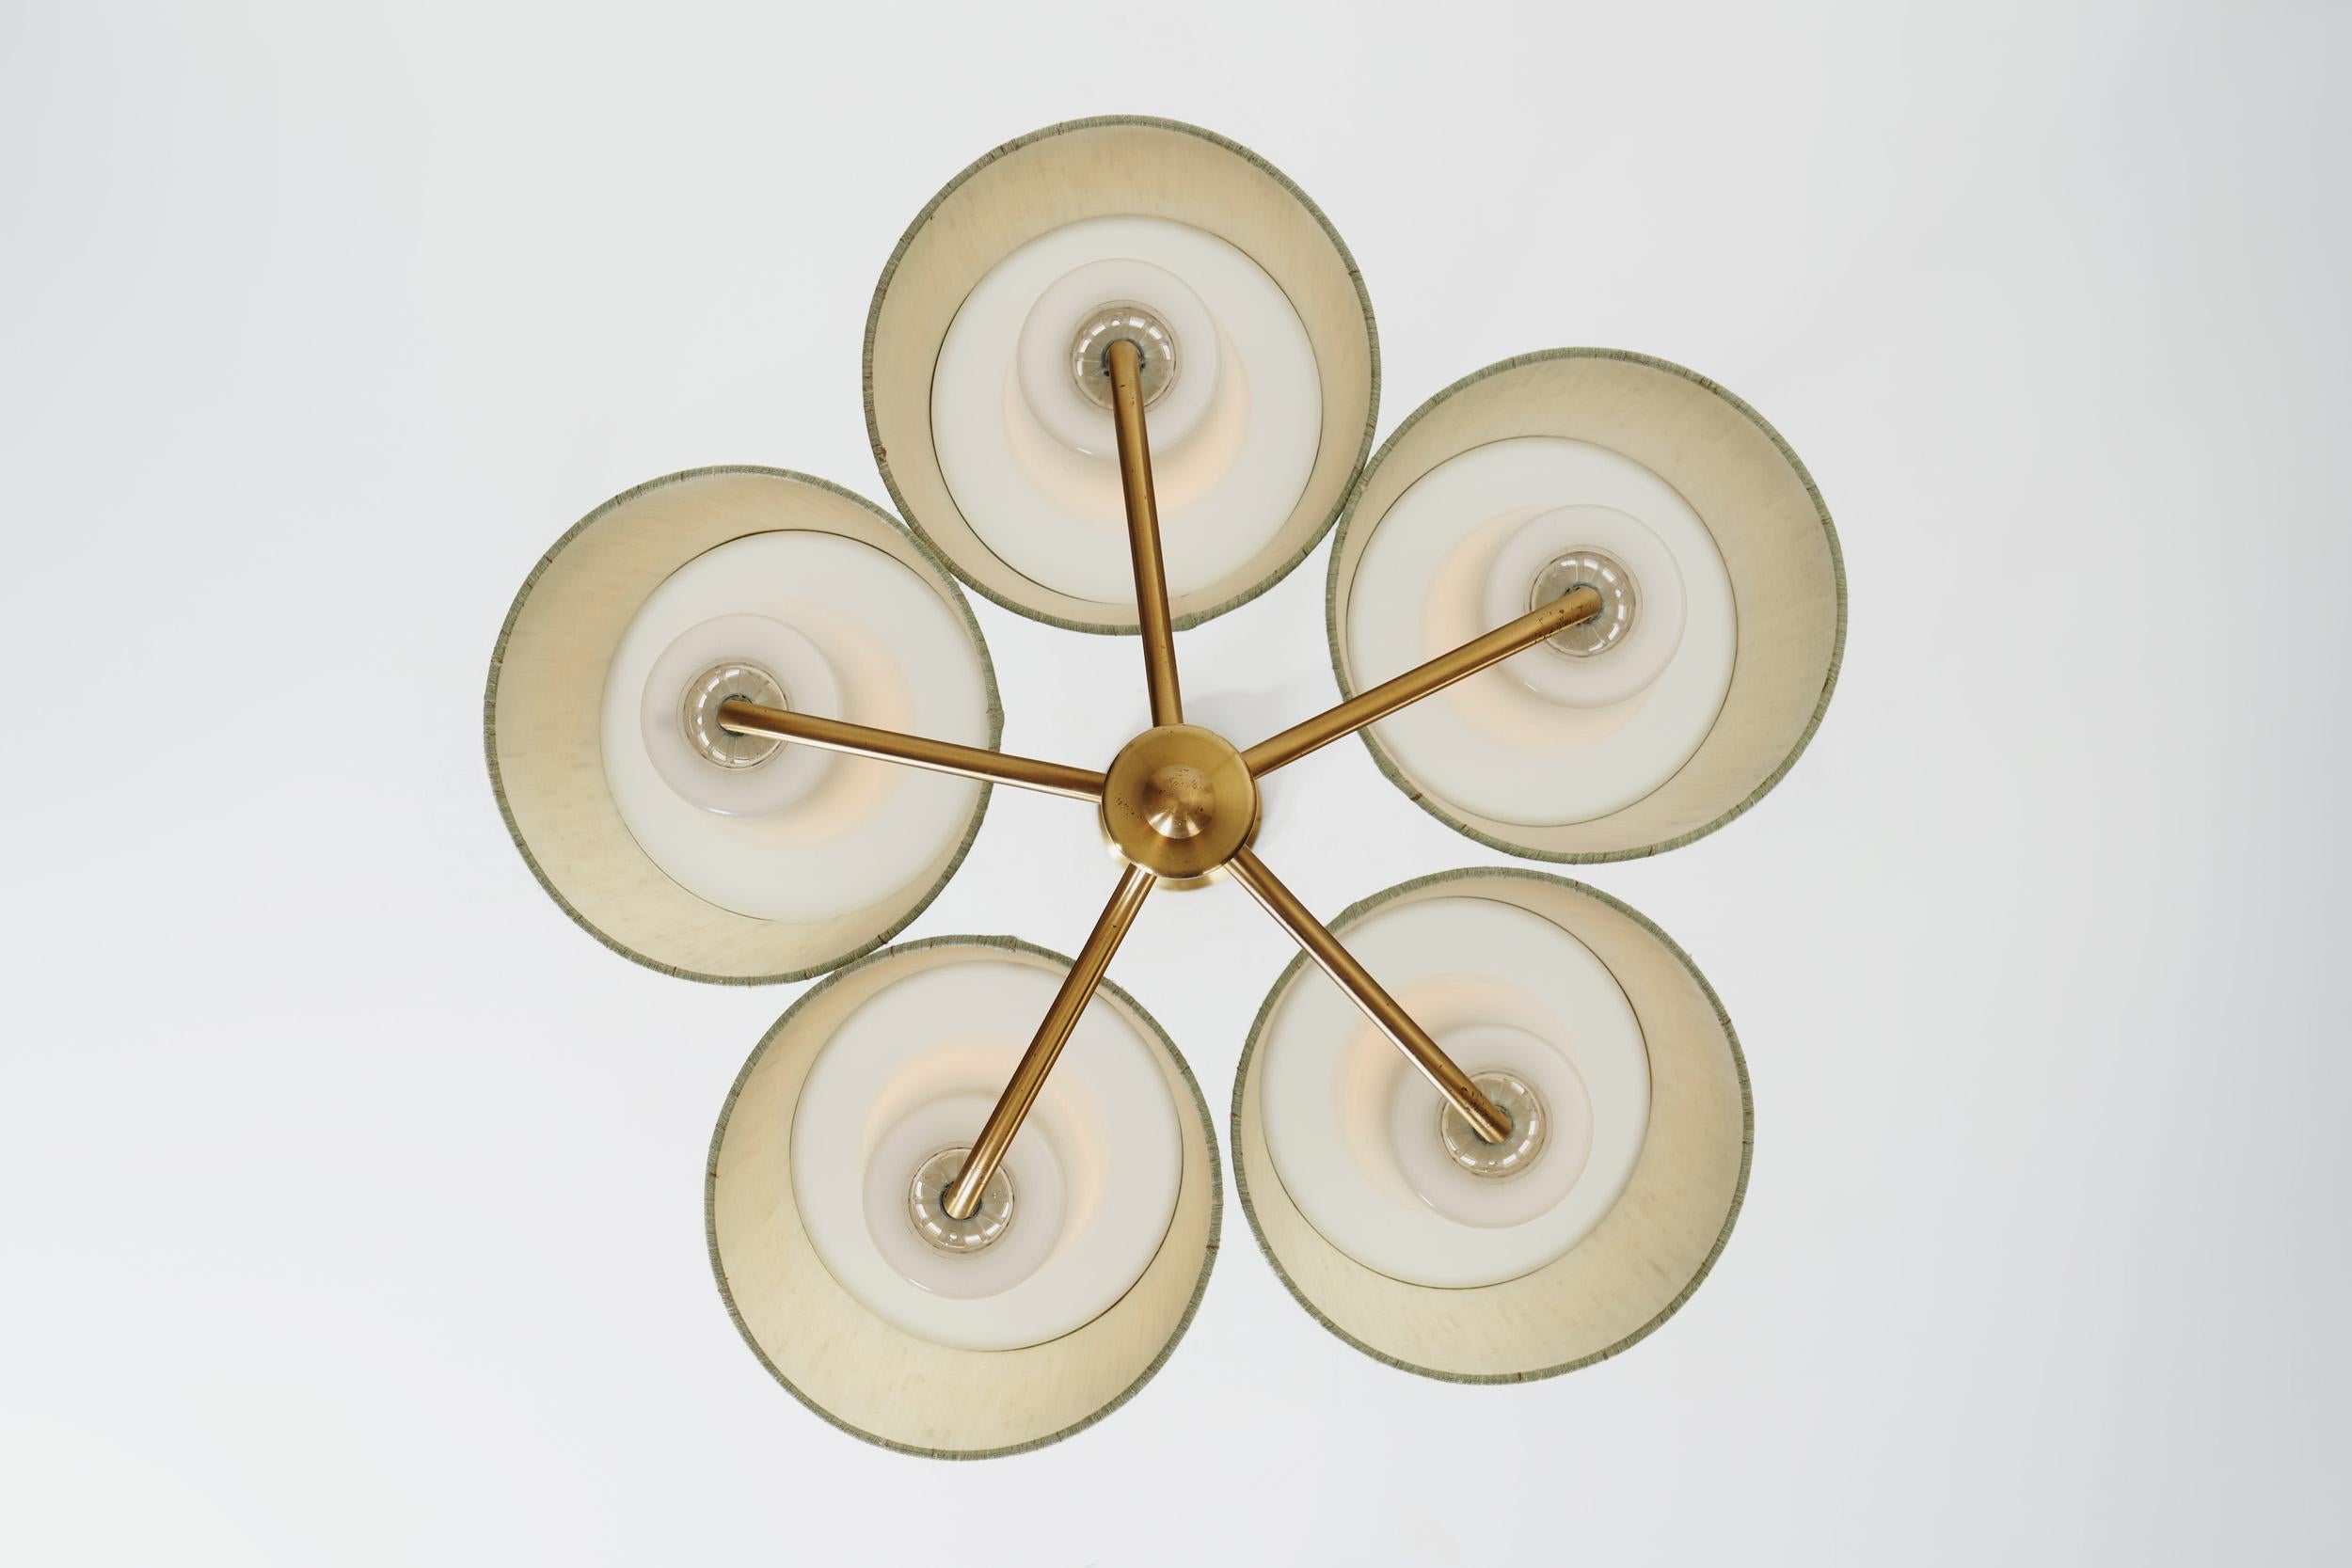 Five Arm Brass Ceiling Lamp with Fabric Shades by Luxus Vittsjö, Sweden 1960s For Sale 11